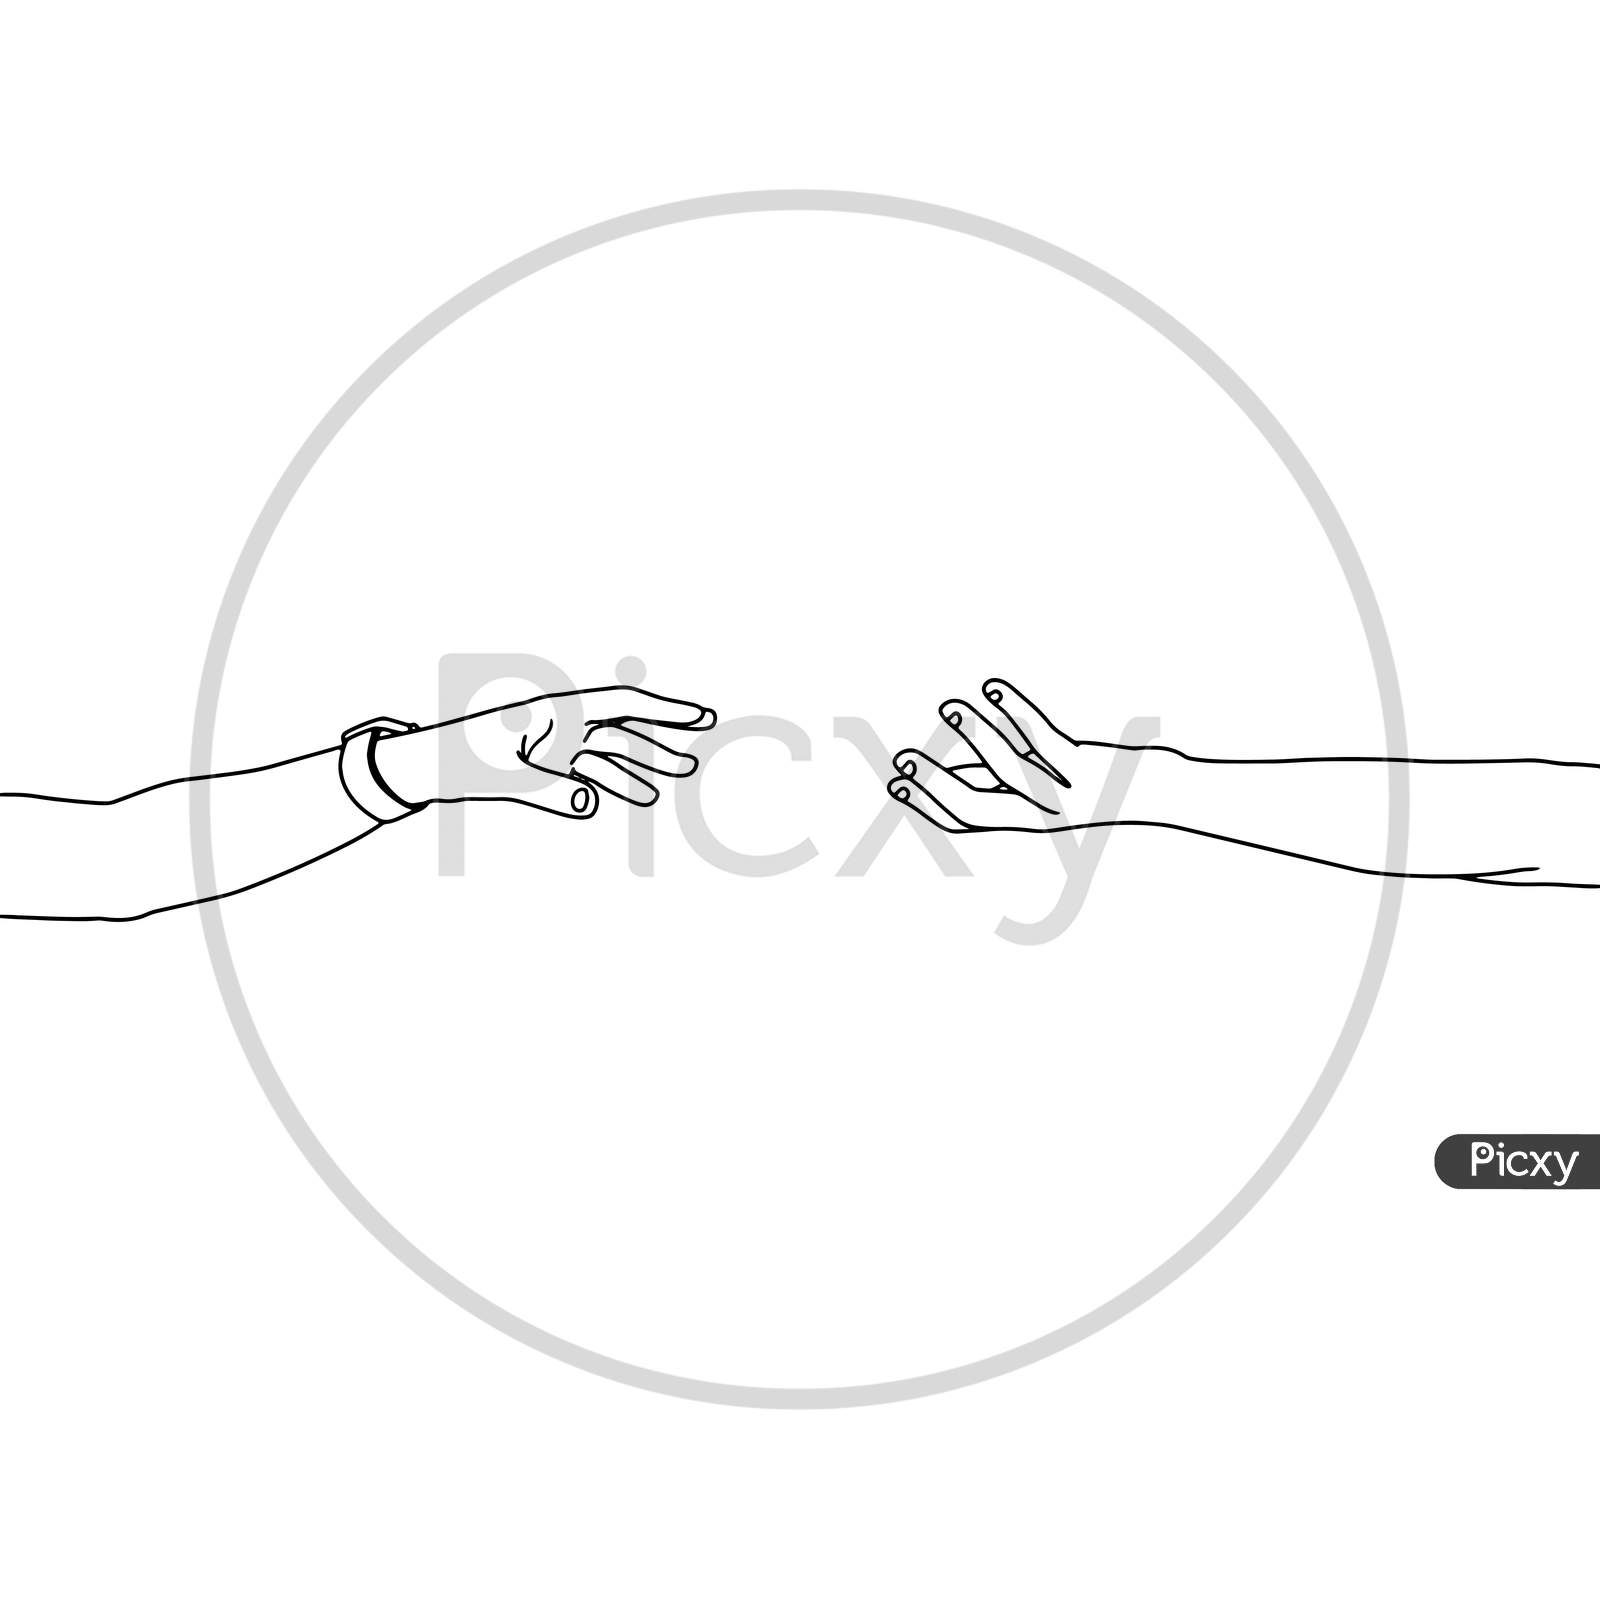 Coloring Pages - Two Hands Trying To Catch Each Other. Vector Illustration Of Two Hands On White Background. Isolated. Vector Illustration For Poster, Banner, Advertisement, Web Background, Promotion Activities.